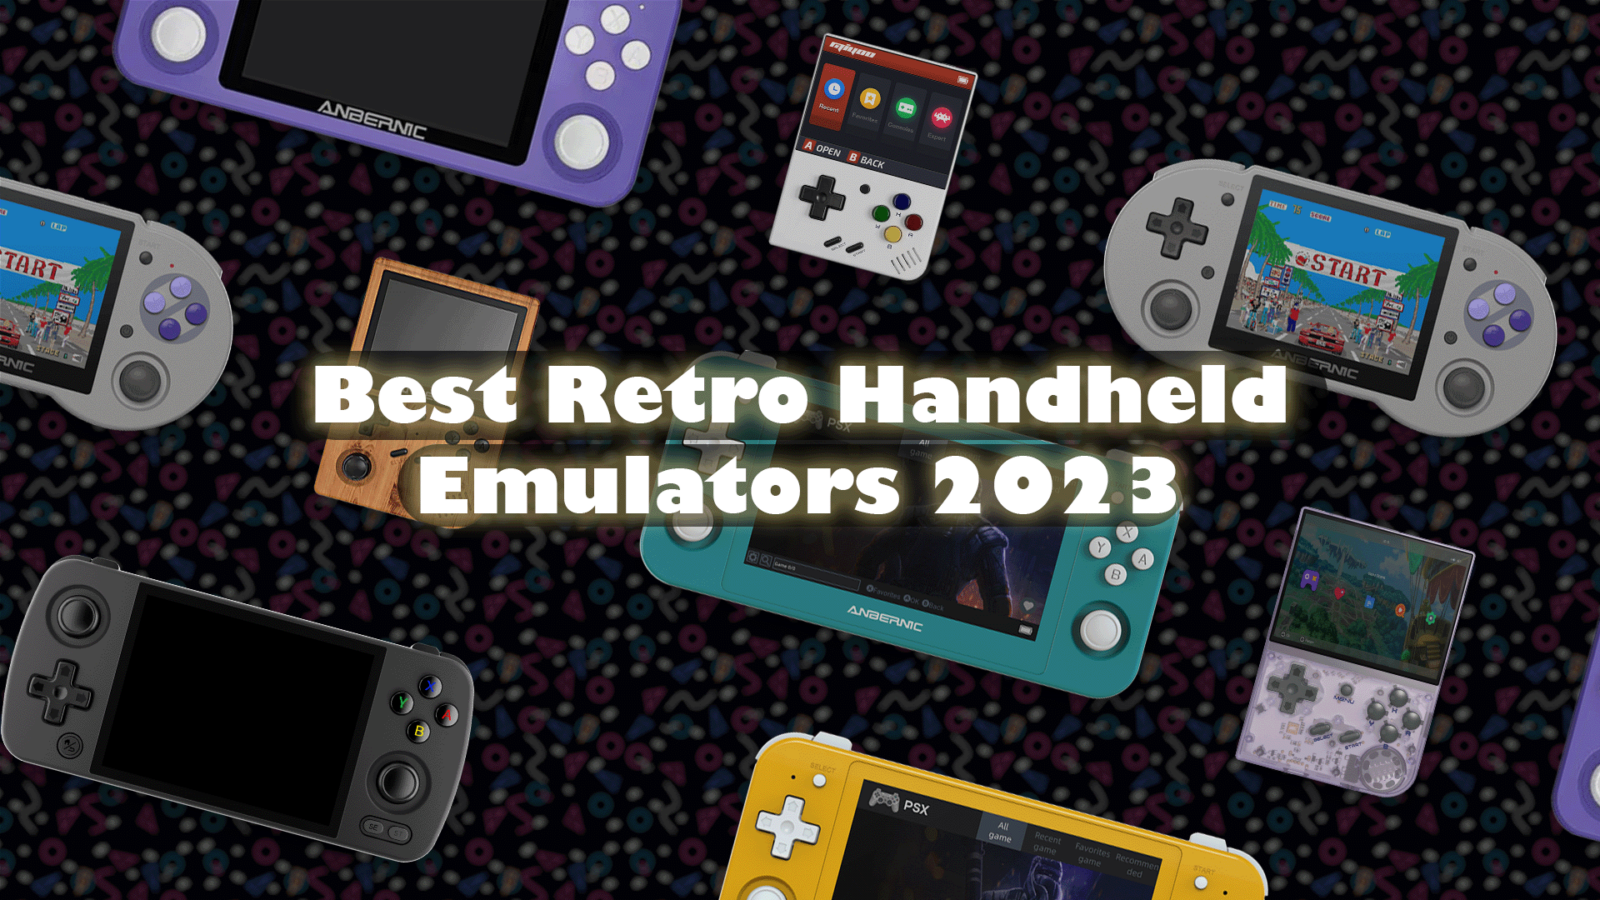 Guide to the Best SNES Emulators in 2022